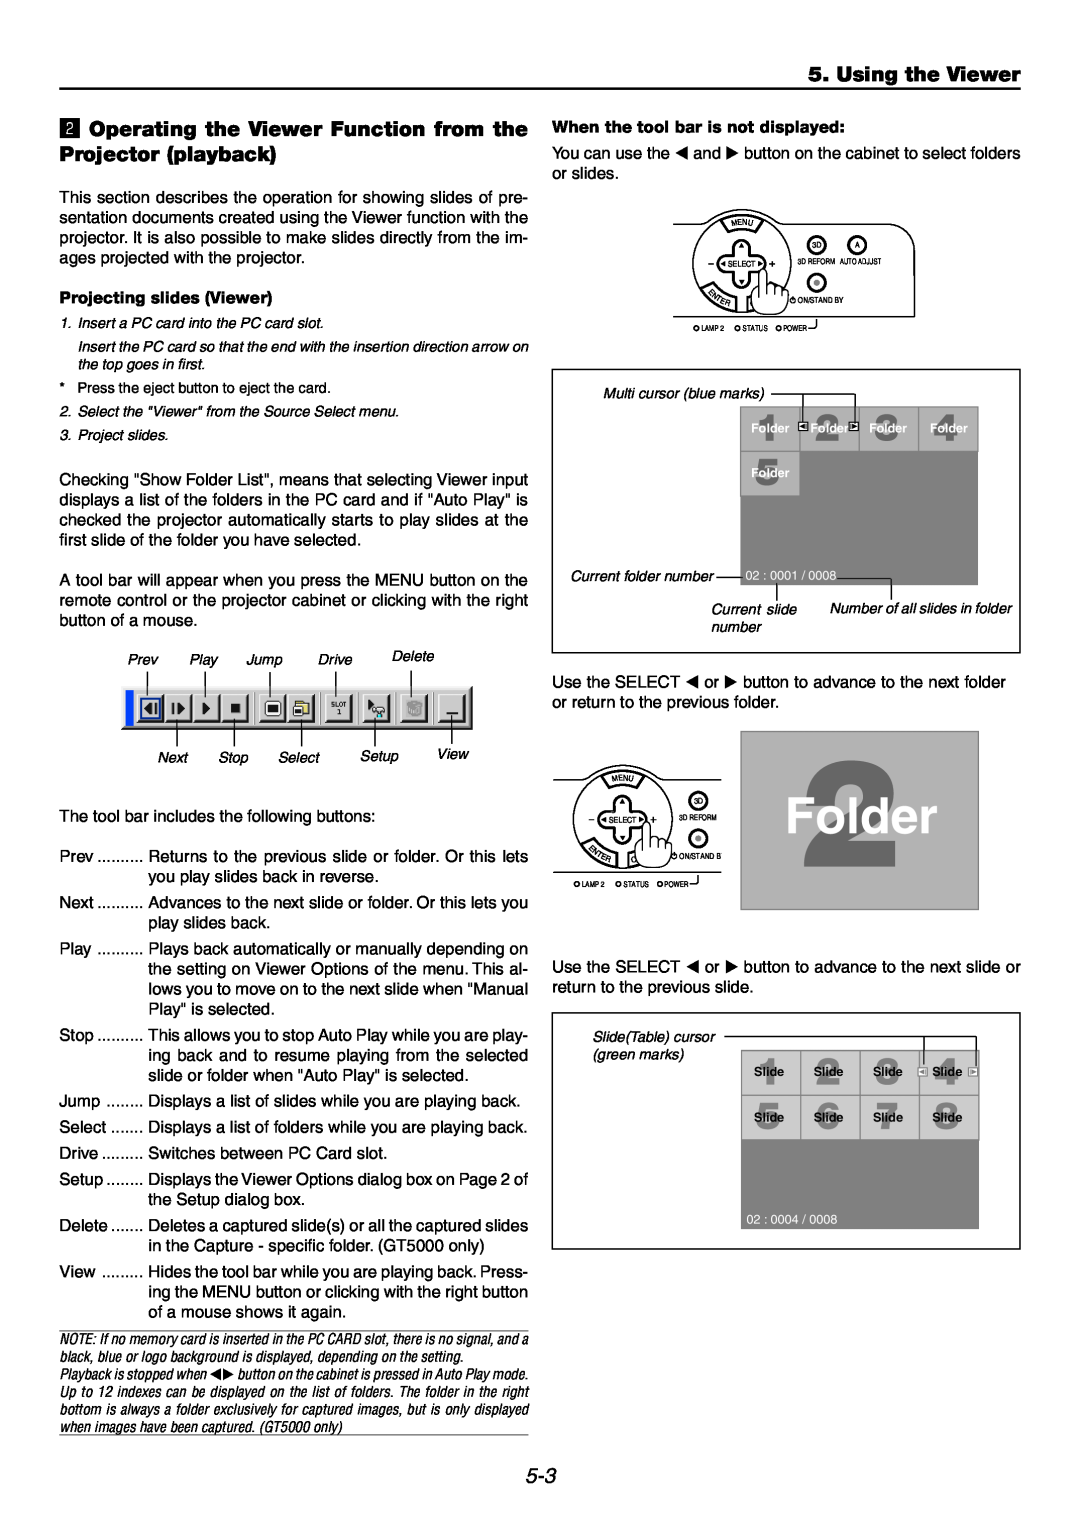 NEC GT6000 user manual Folder, Using the Viewer, x Operating the Viewer Function from the, Projector playback 